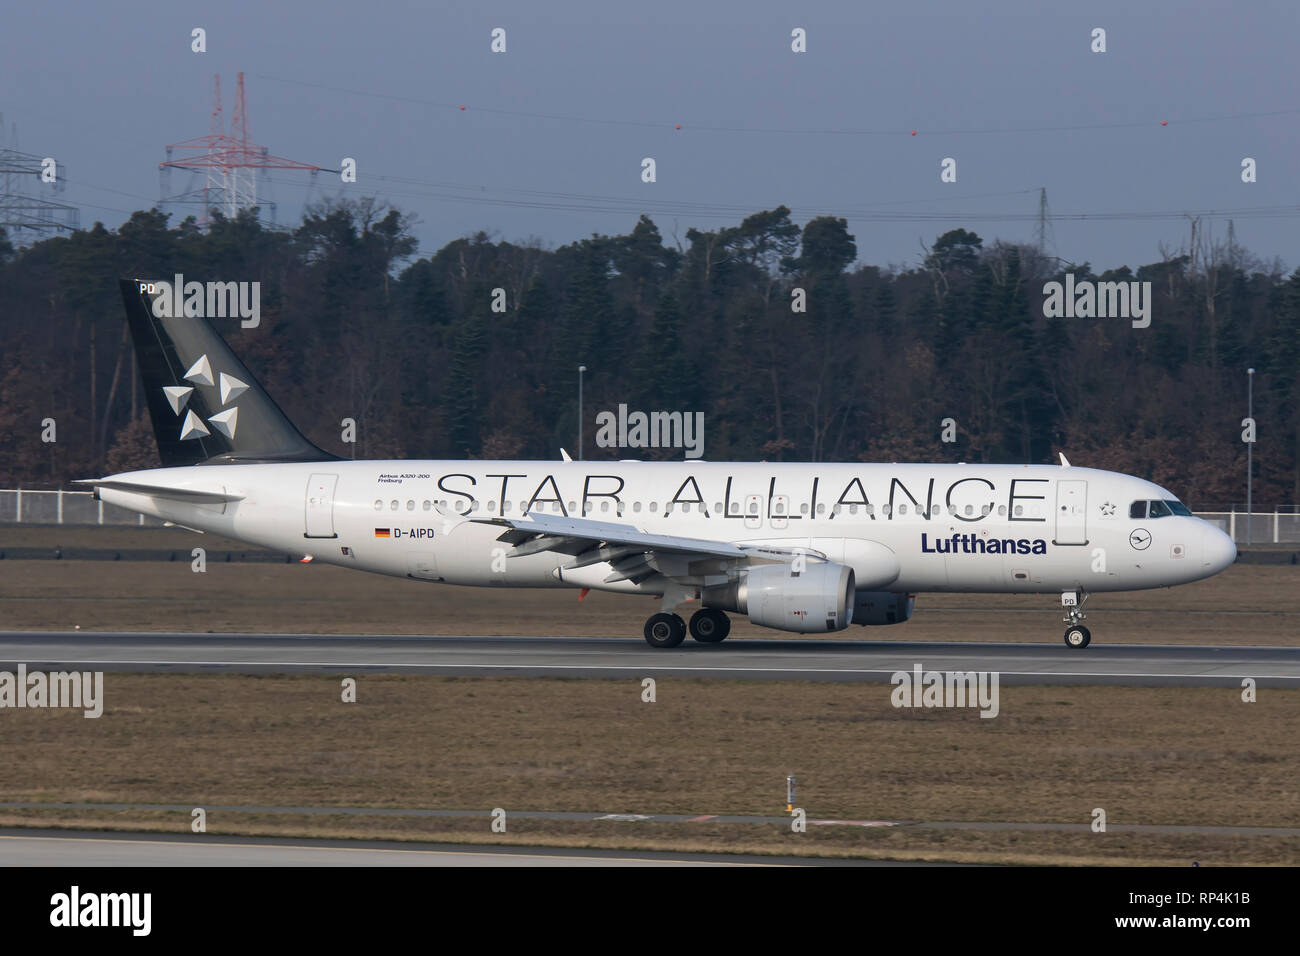 D-AIPD Airbus A320 of Lufthansa in Star Alliance scheme landing at Frankfurt Airport Germany on 07/02/2018 Stock Photo